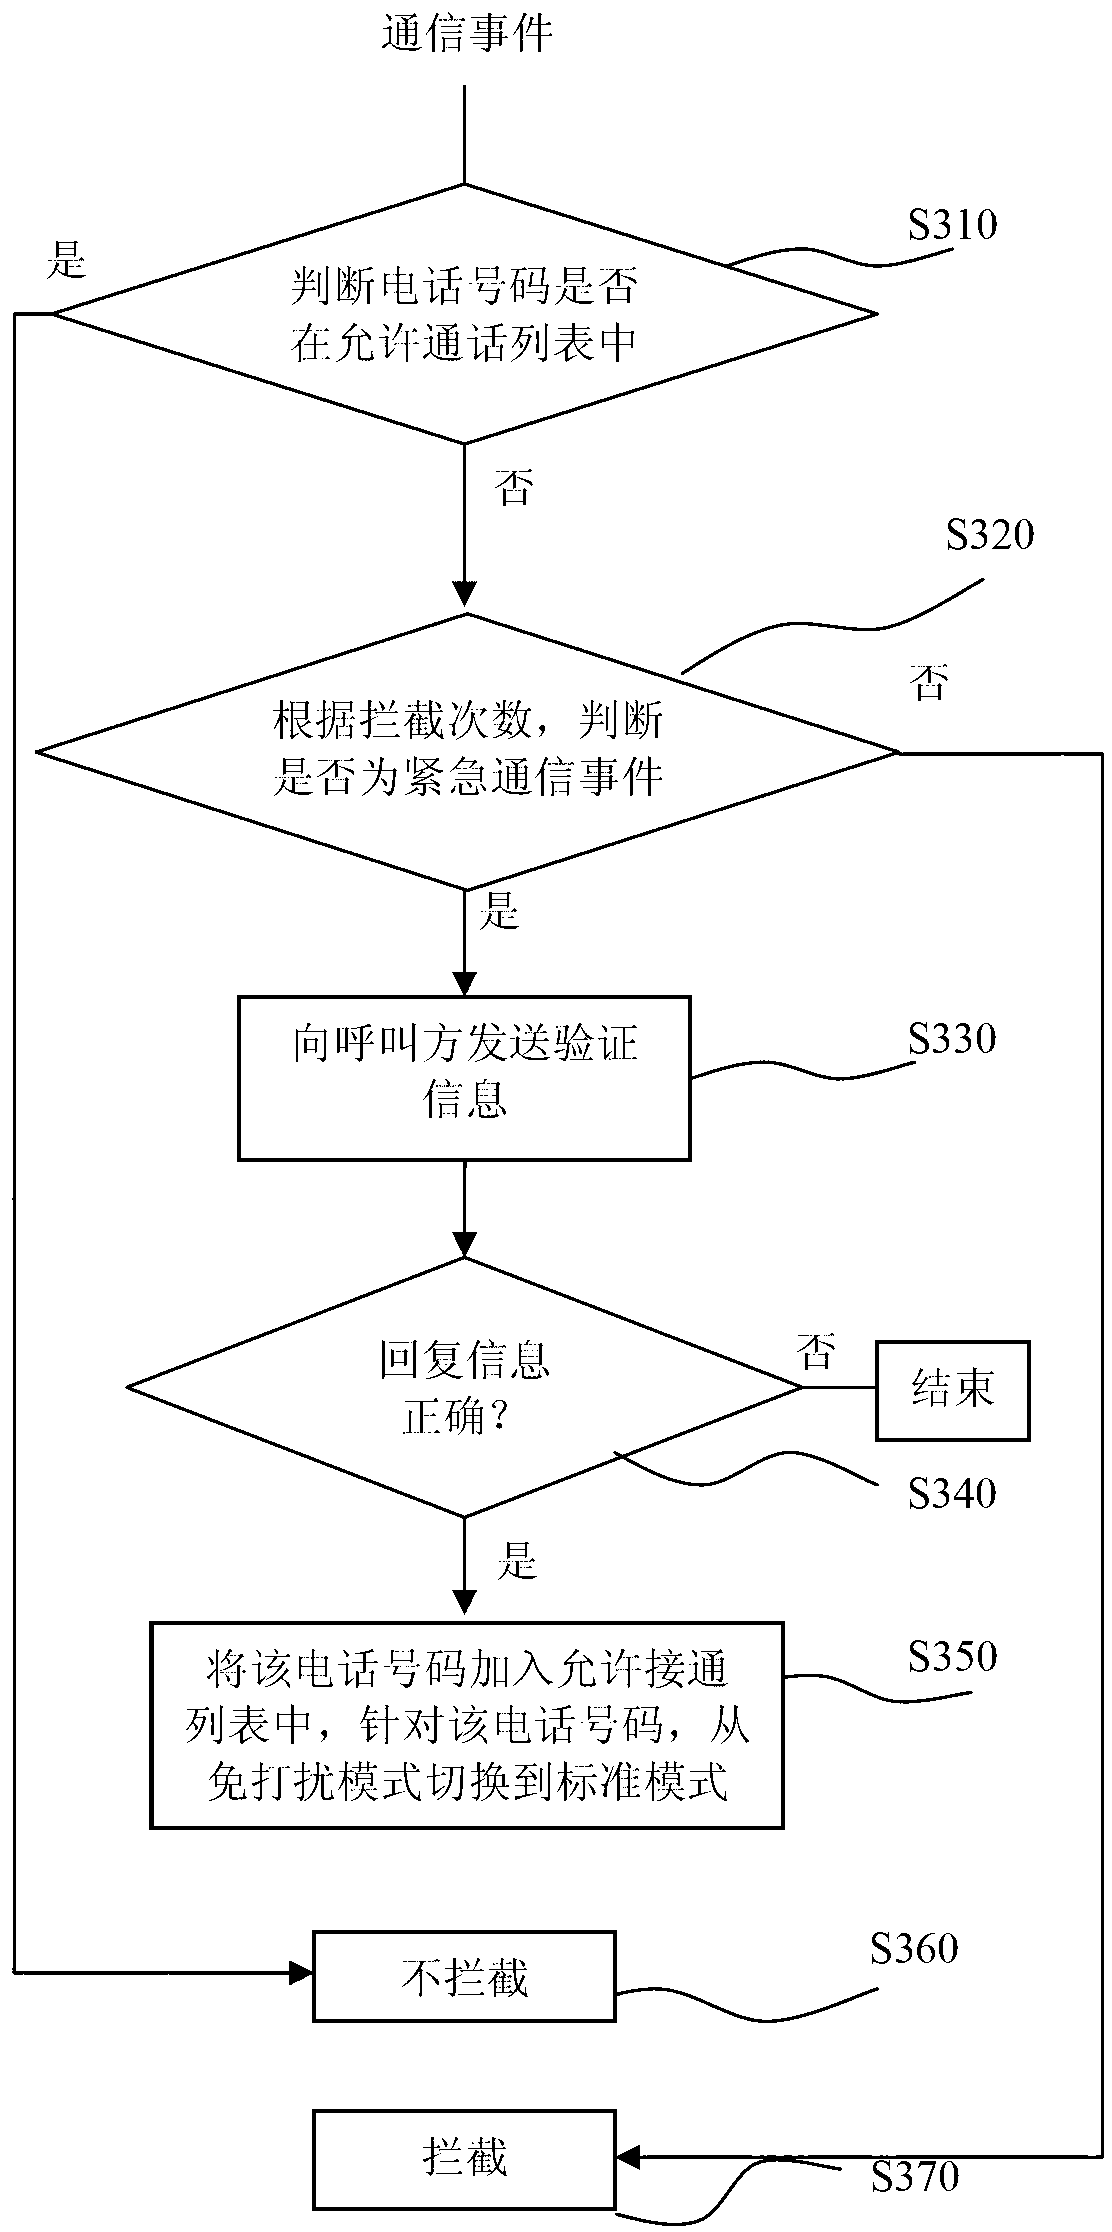 Communication event processing method and communication event processing device